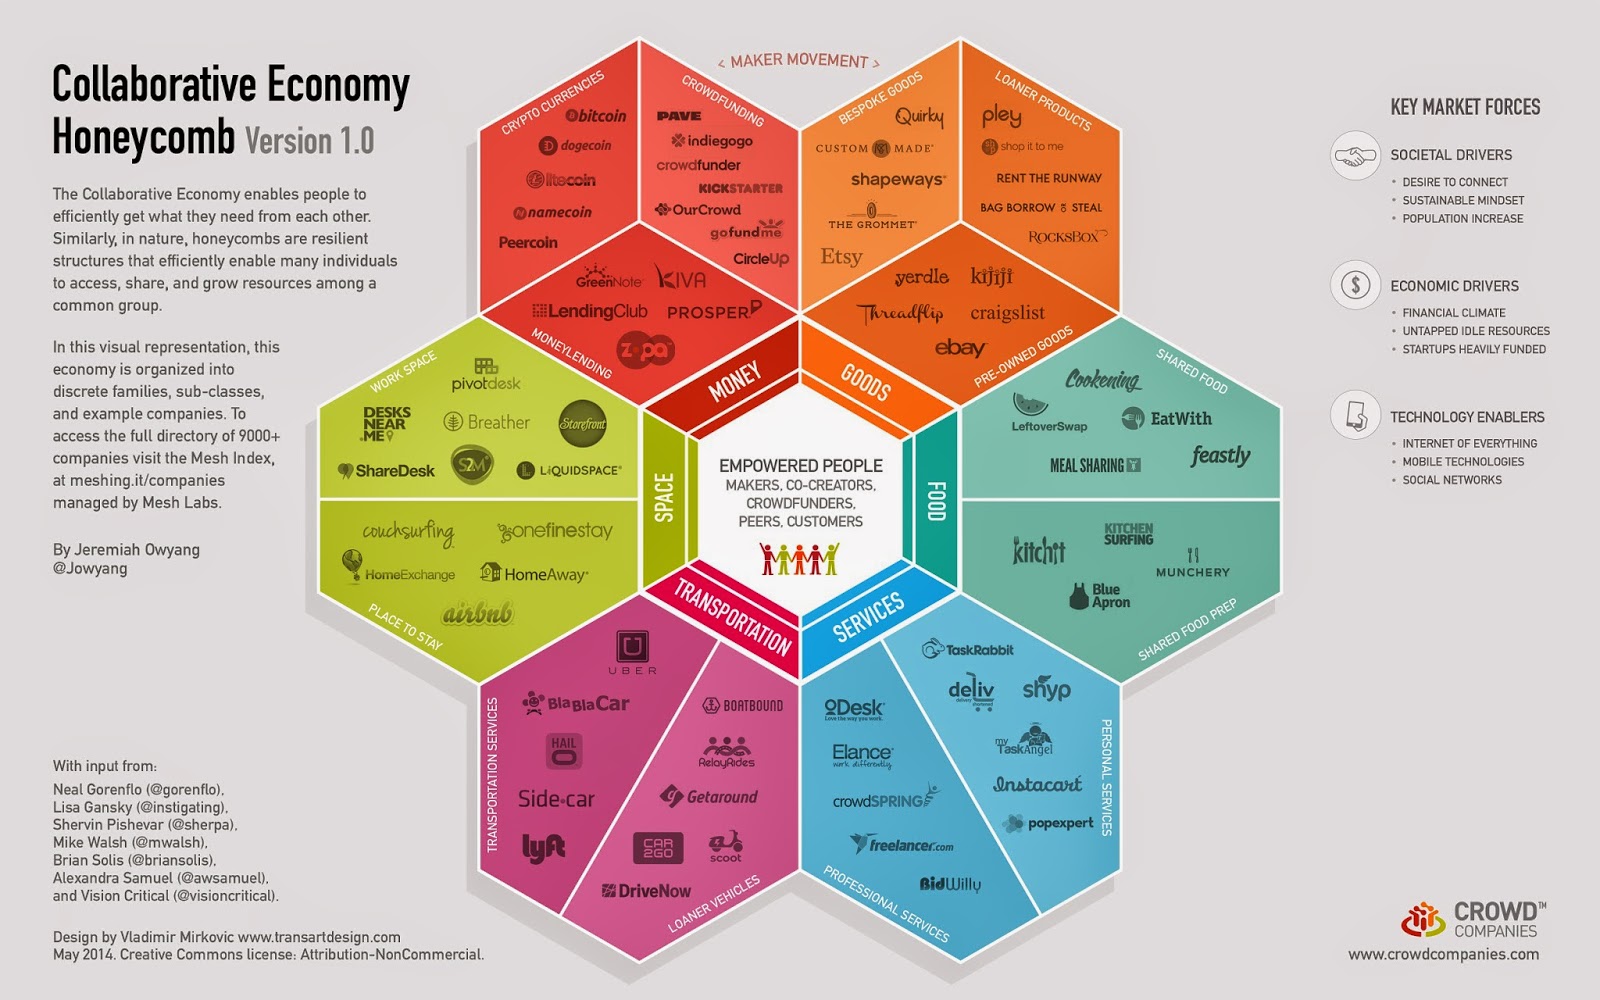 Money, goods, services, food, space and transportation in the collaborative economy